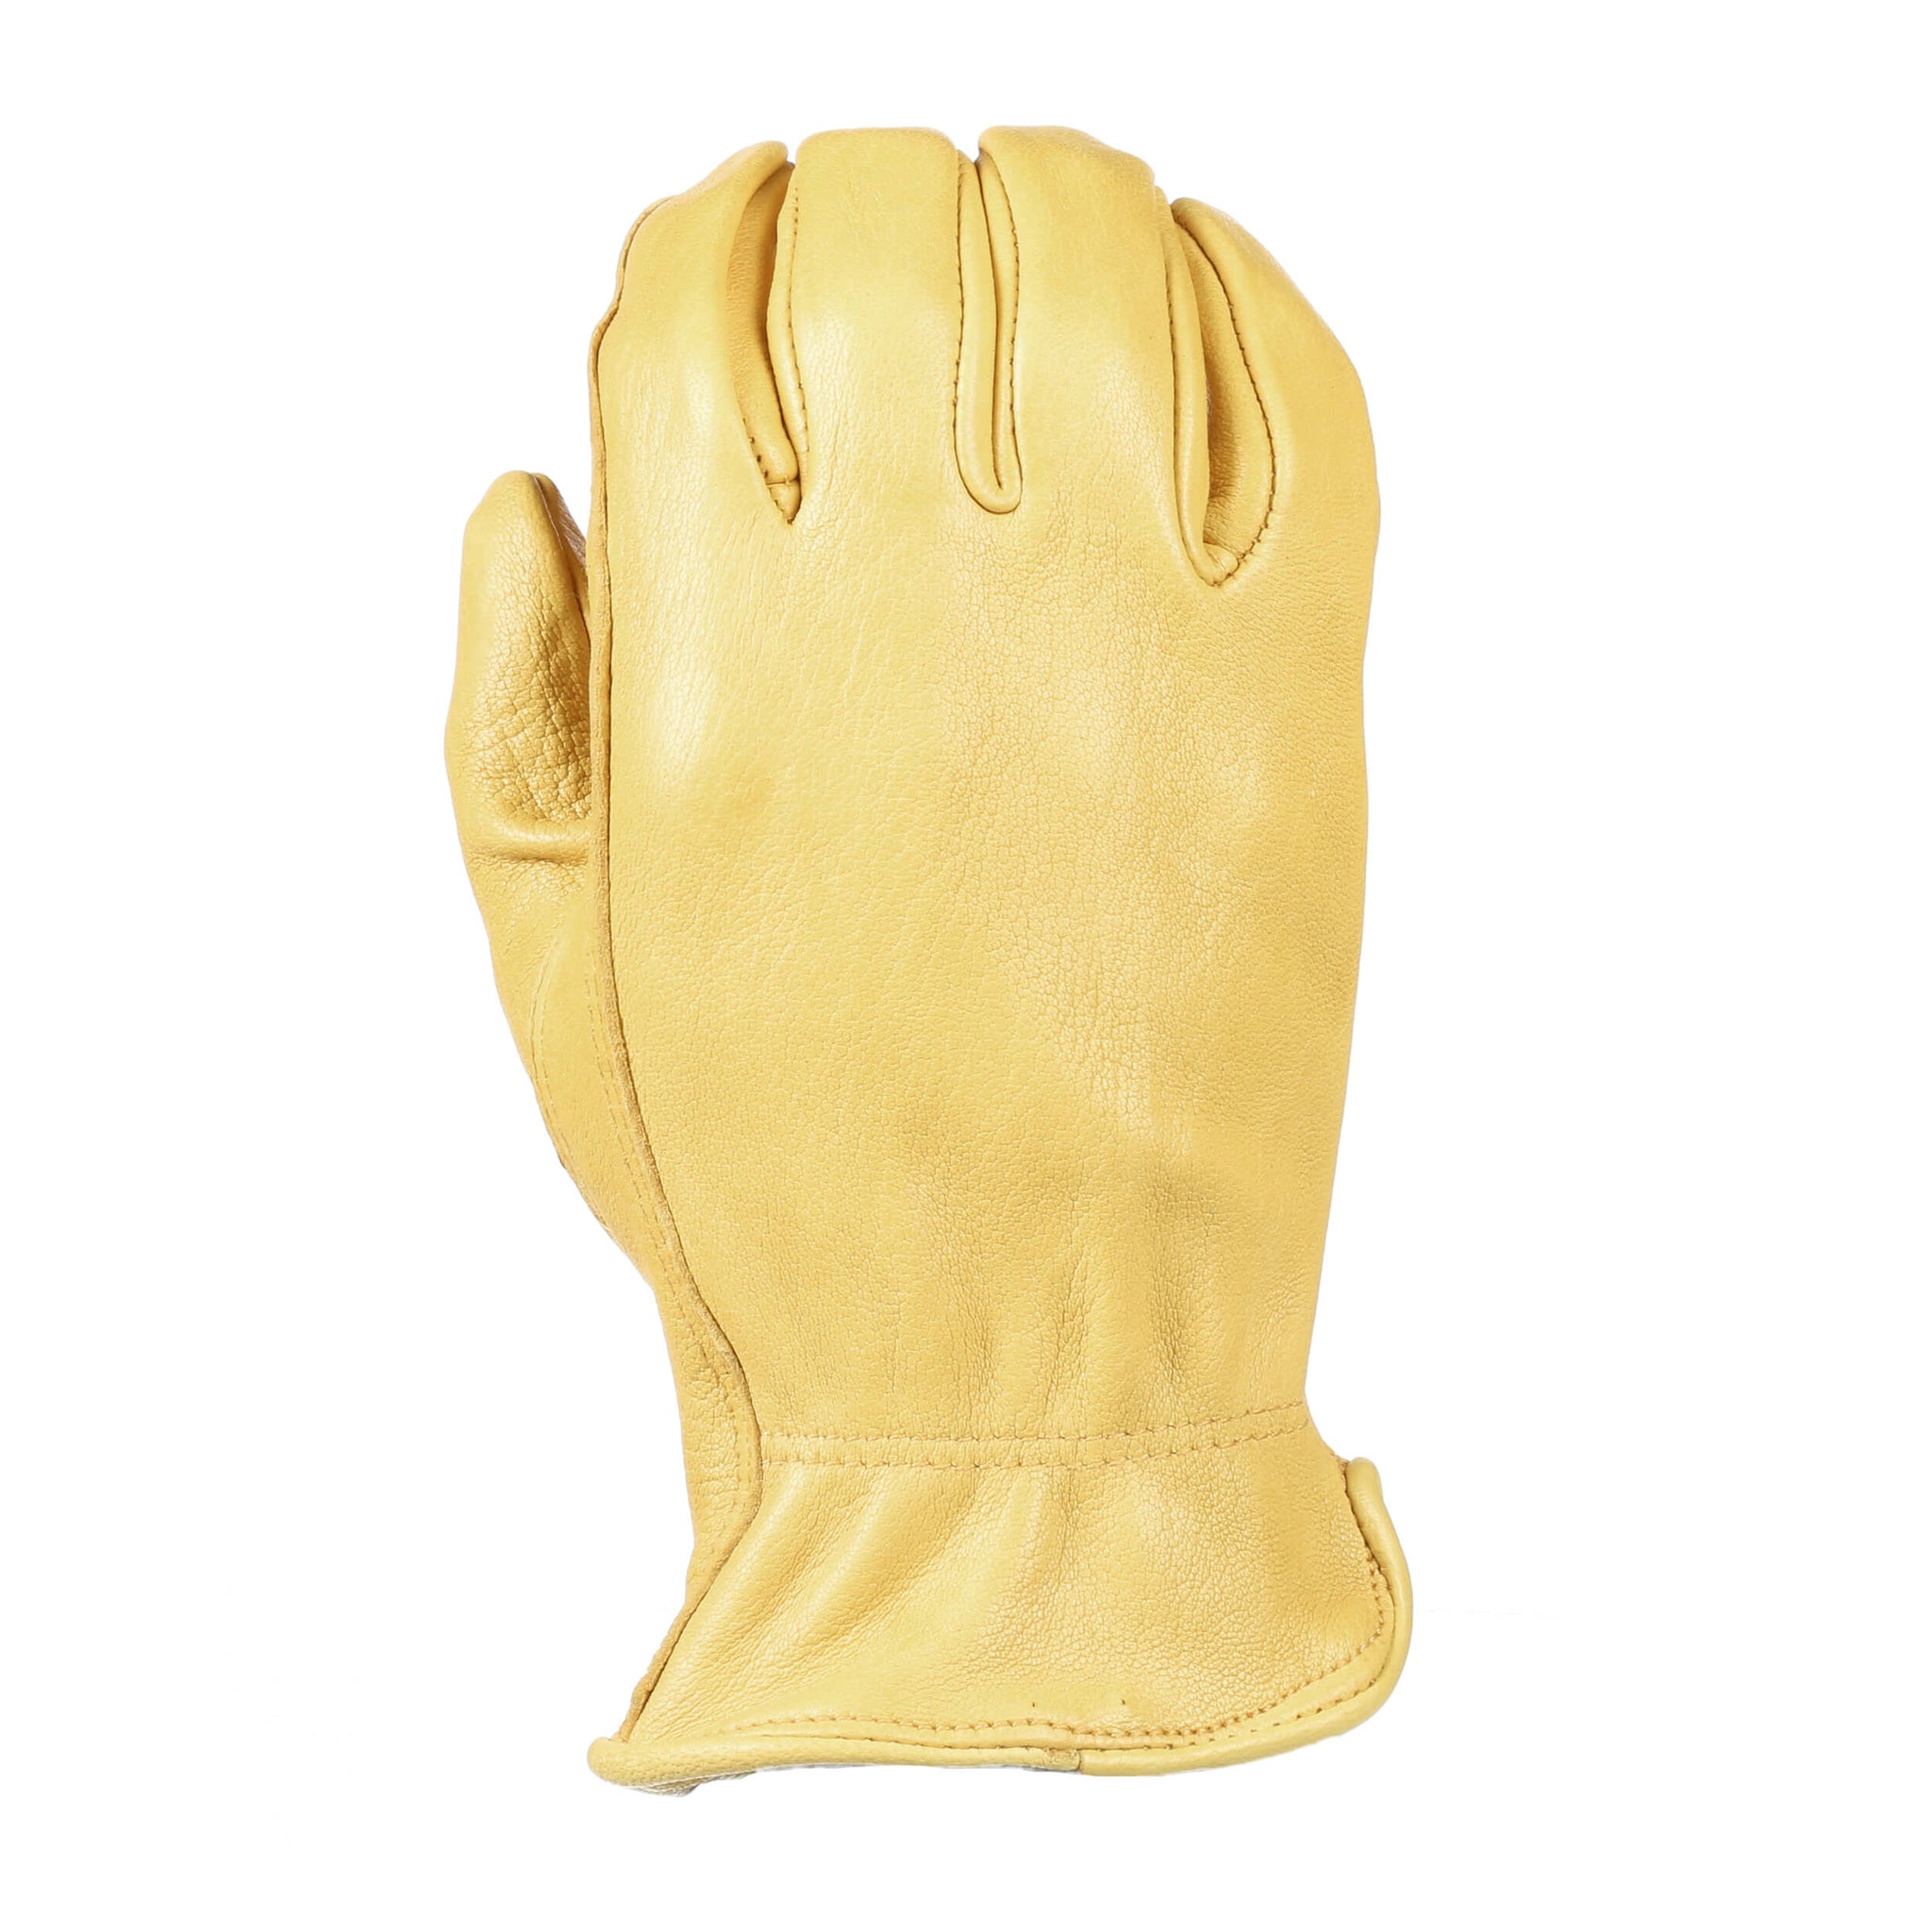 Wells Lamont Grips Gold Insulated Waterproof Gloves, Men Large 